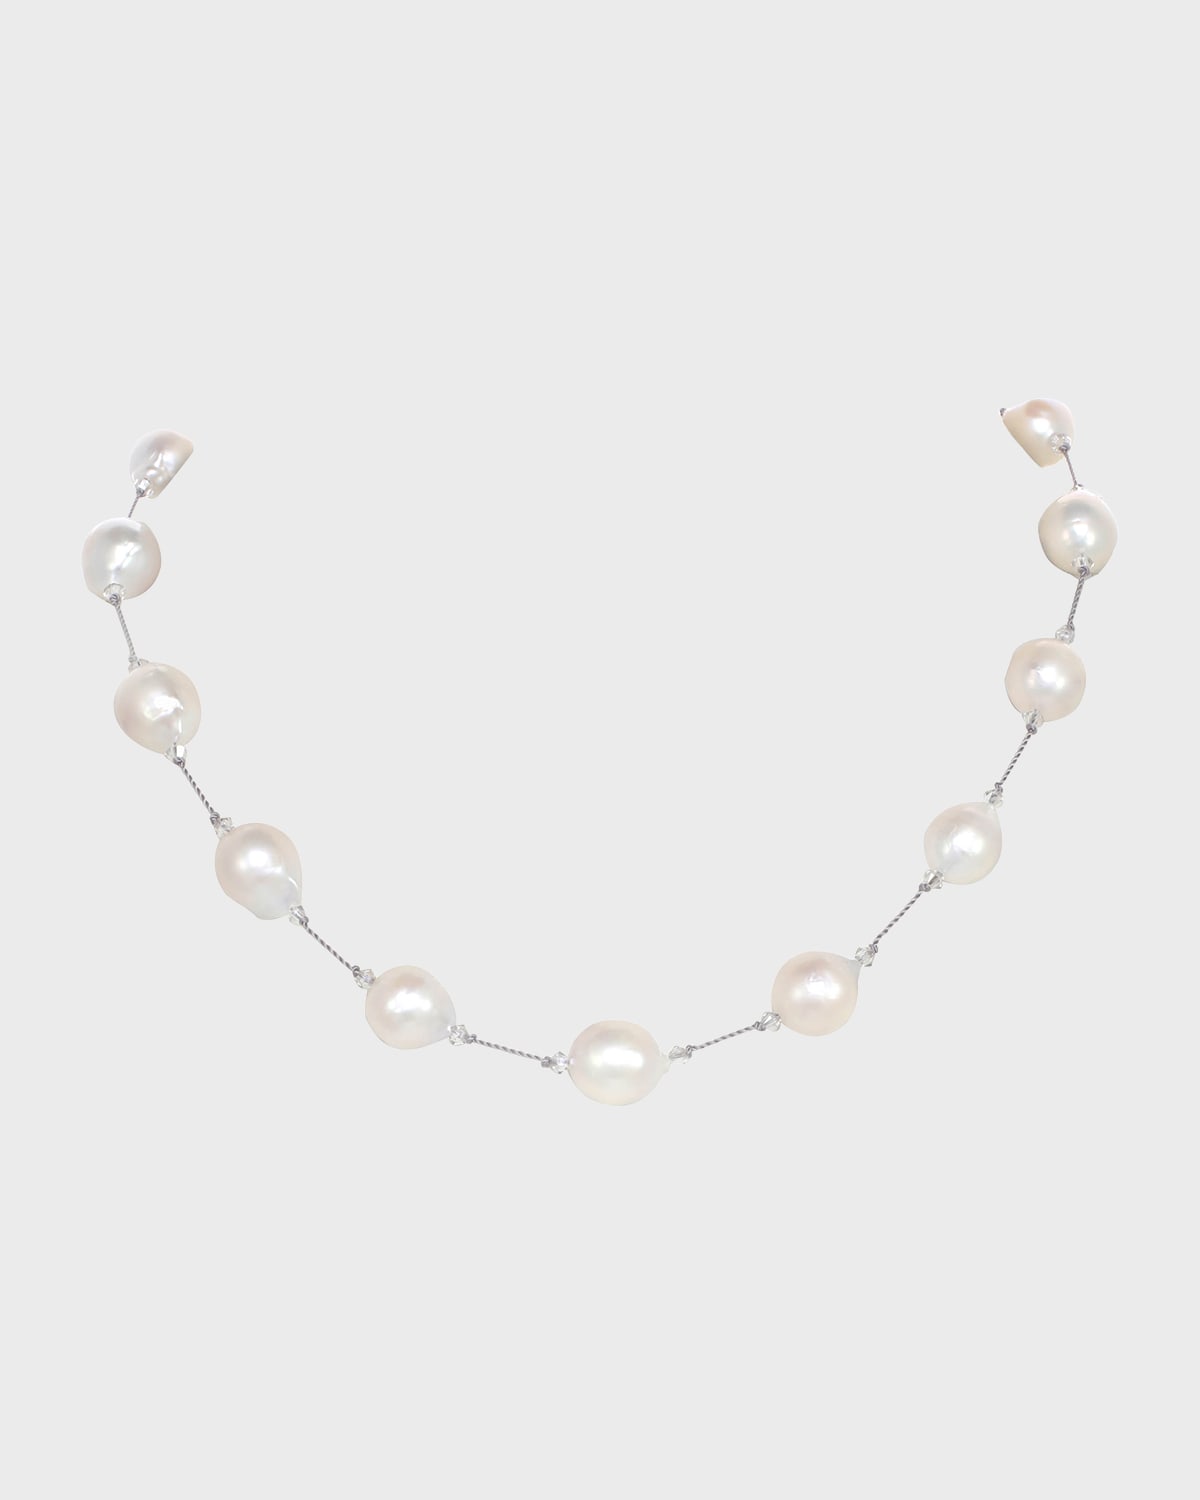 Margo Morrison Small Multicolor Baroque Pearl Necklace With Crystal, Sterling Silver Clasp In White